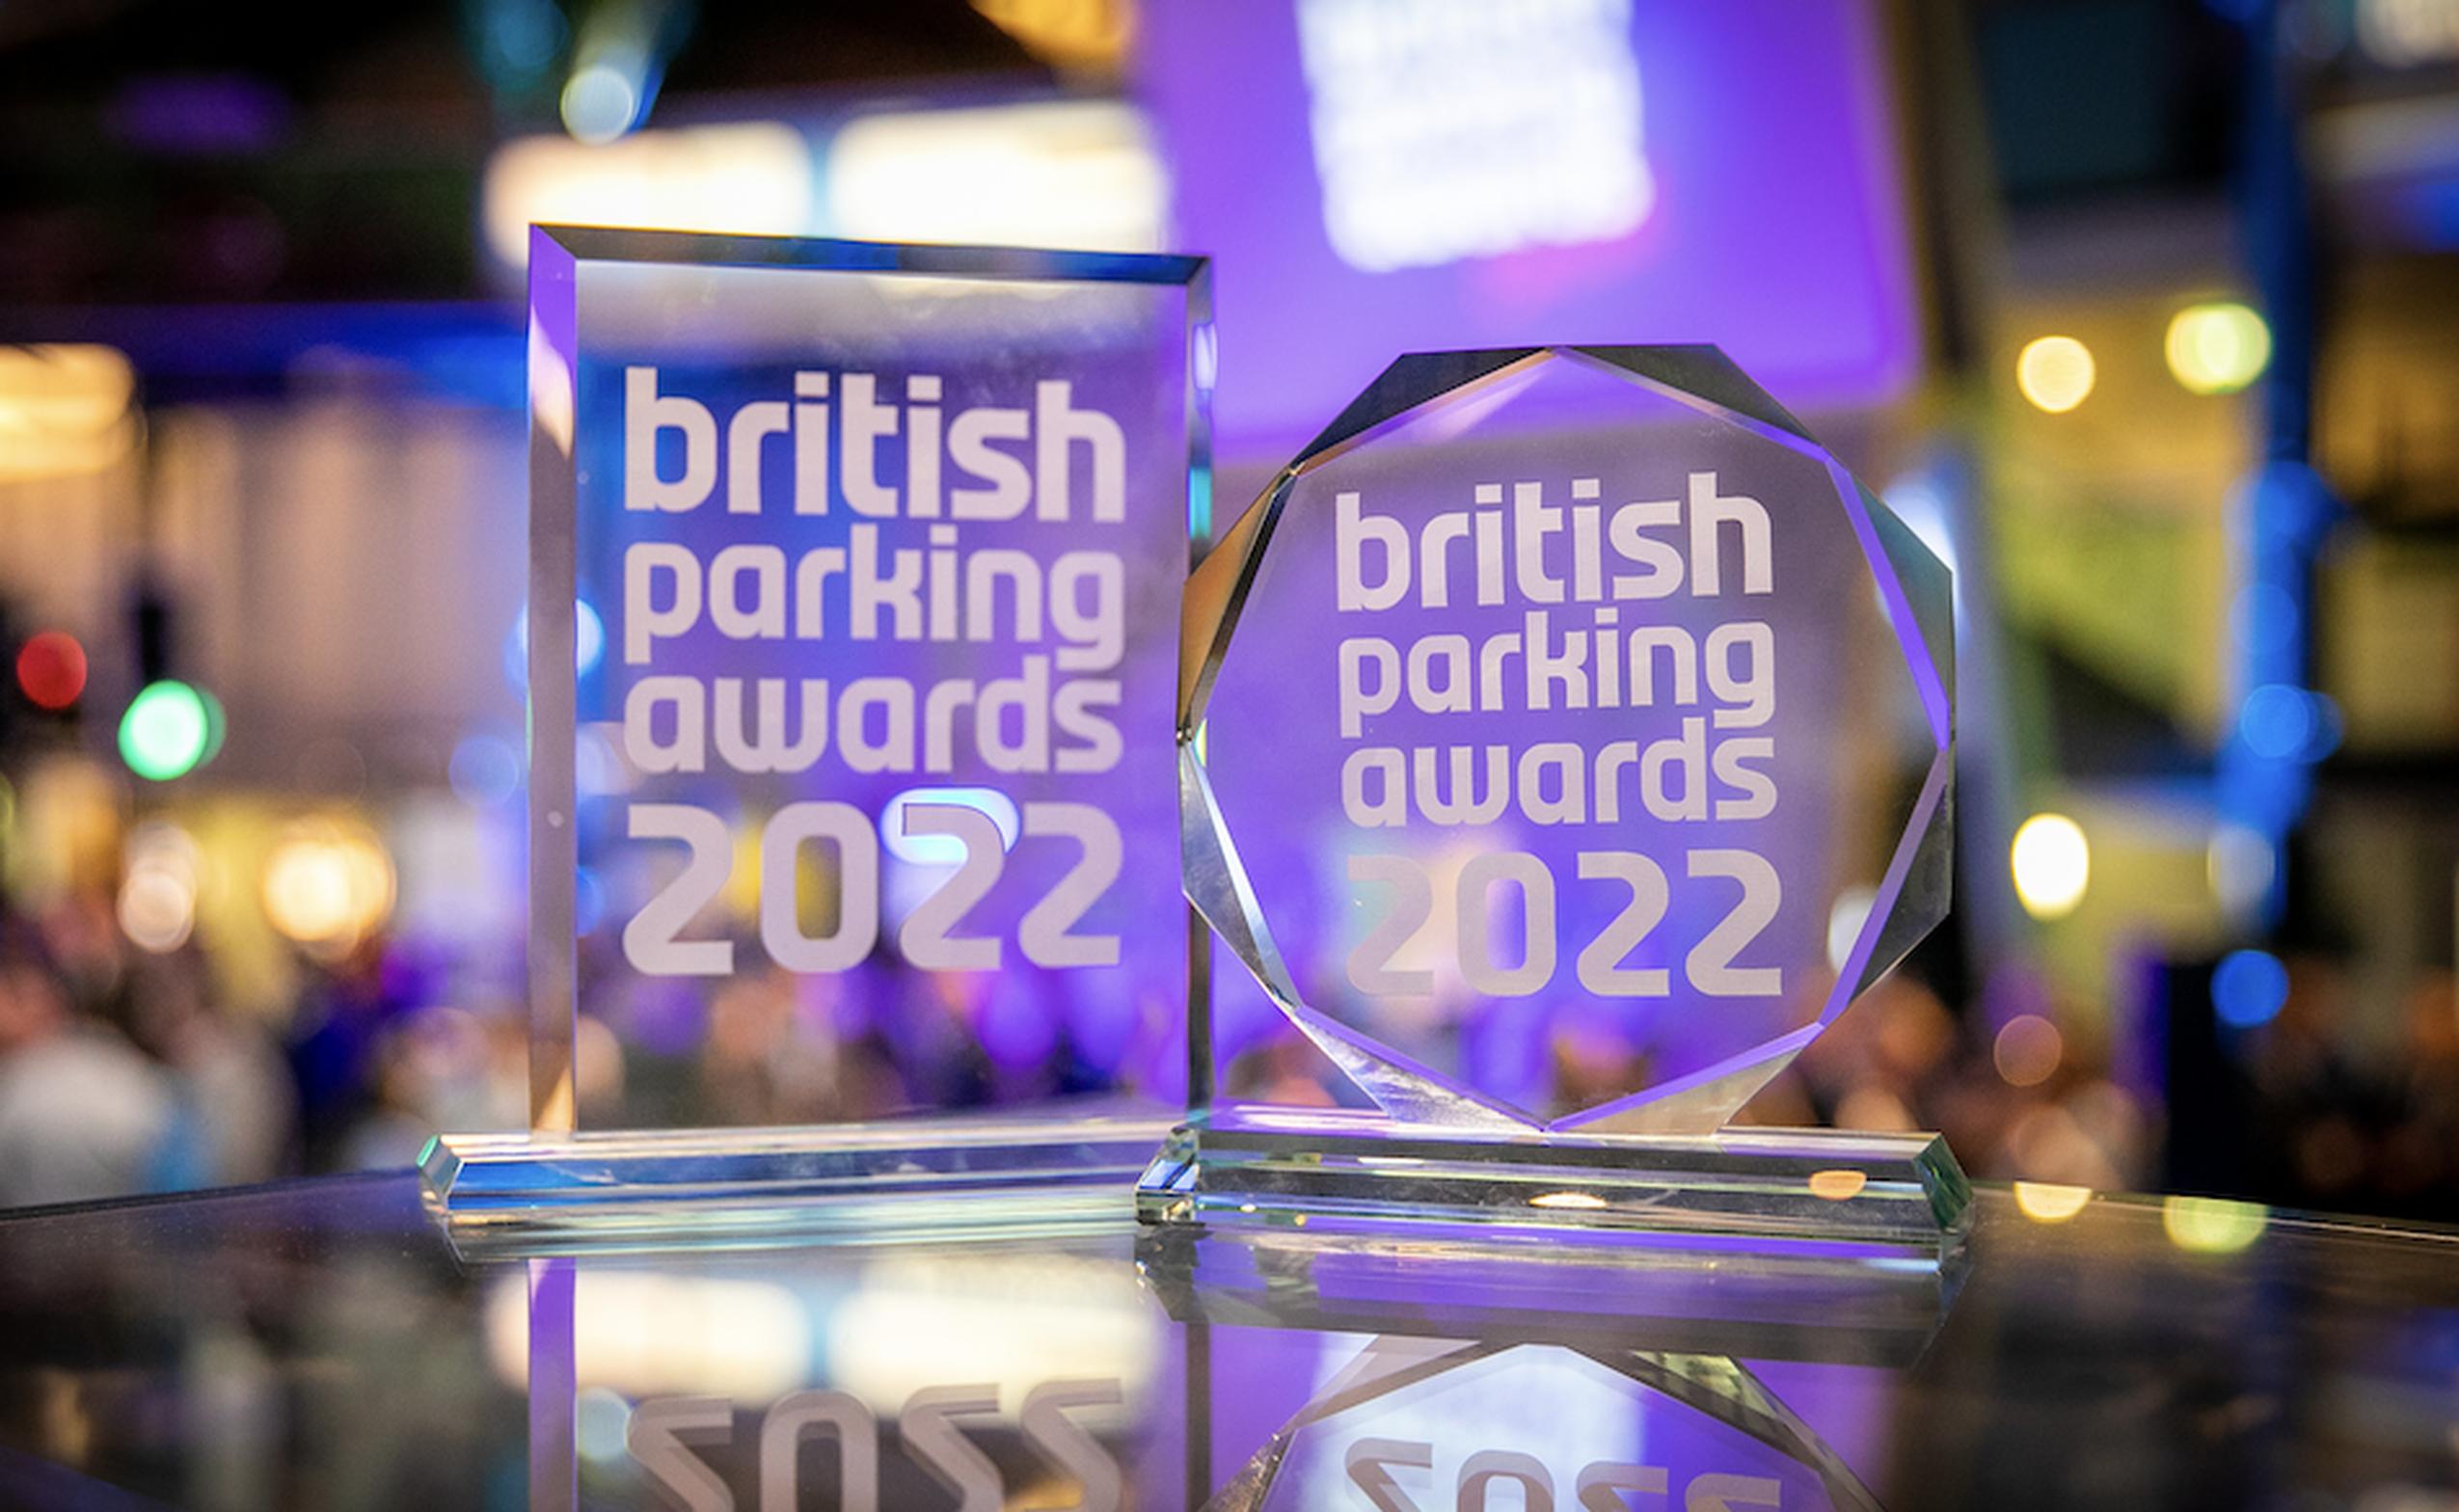 The British Parking Award trophy and a British Parking Awards rosette